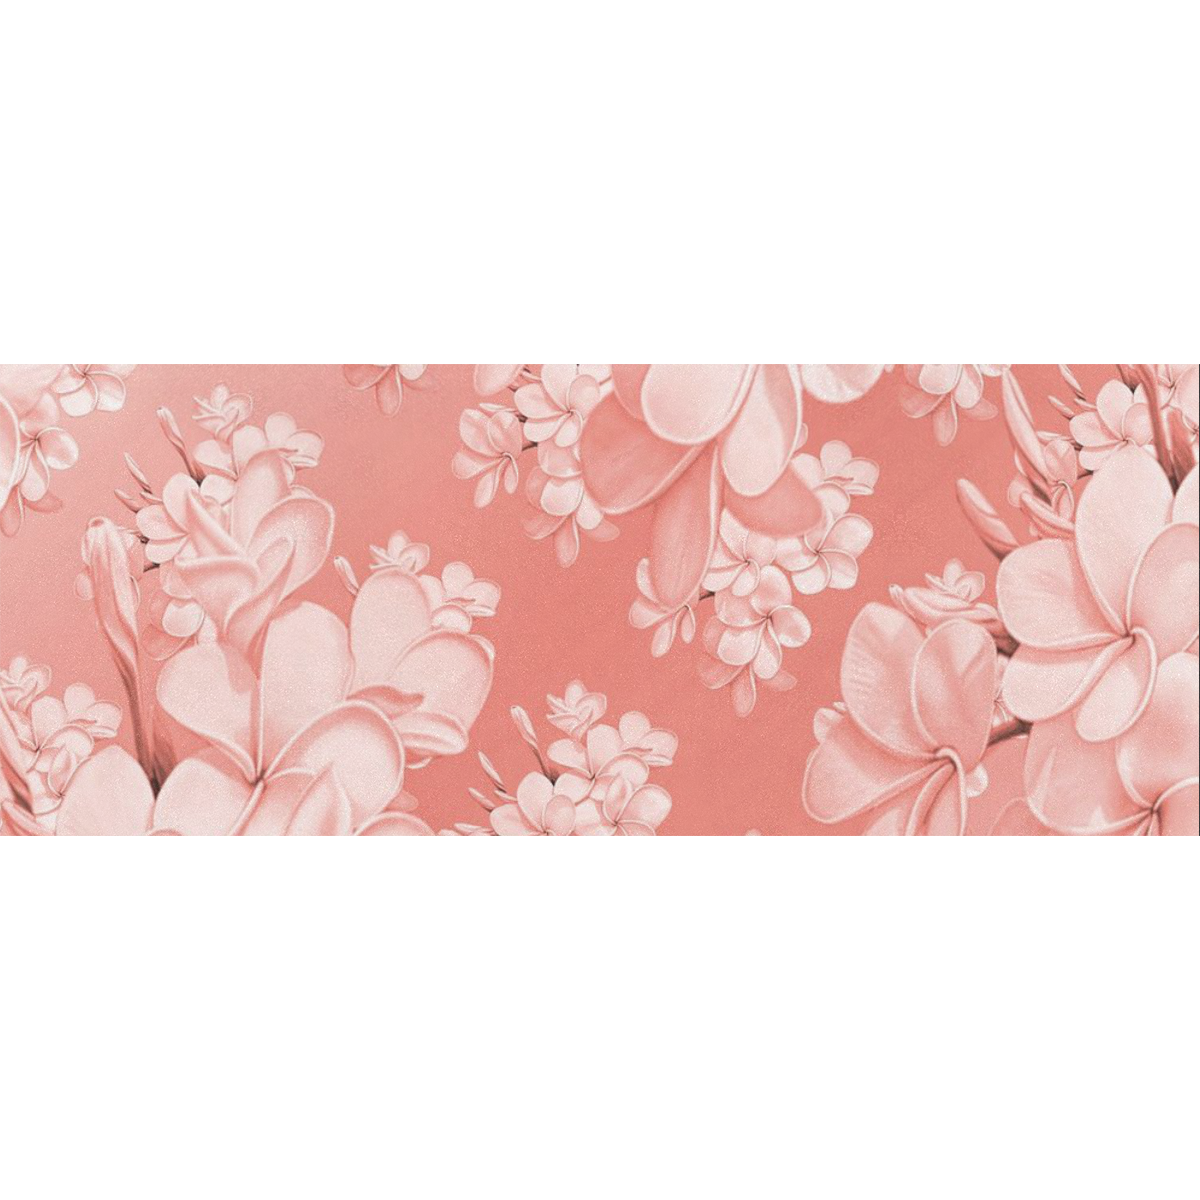 Delicate floral pattern,pink Gift Wrapping Paper 58"x 23" (2 Rolls)